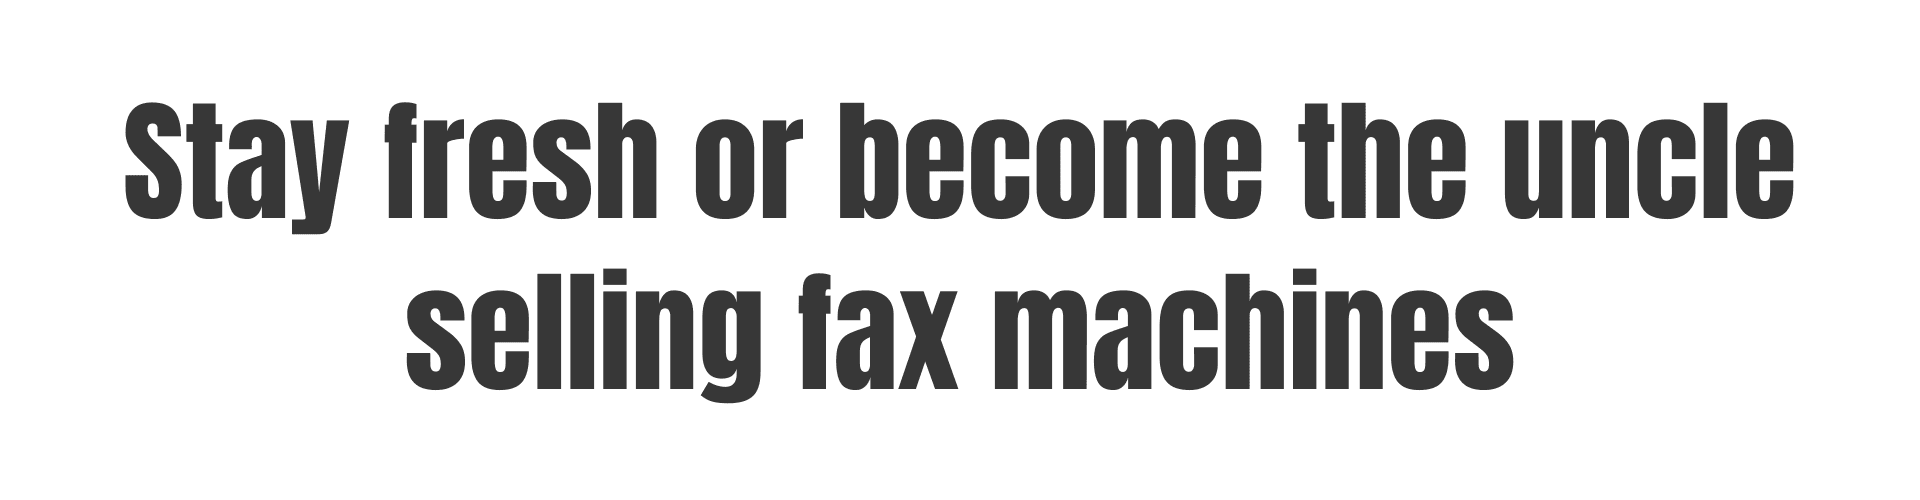 stay fresh or become the uncle selling fax machines